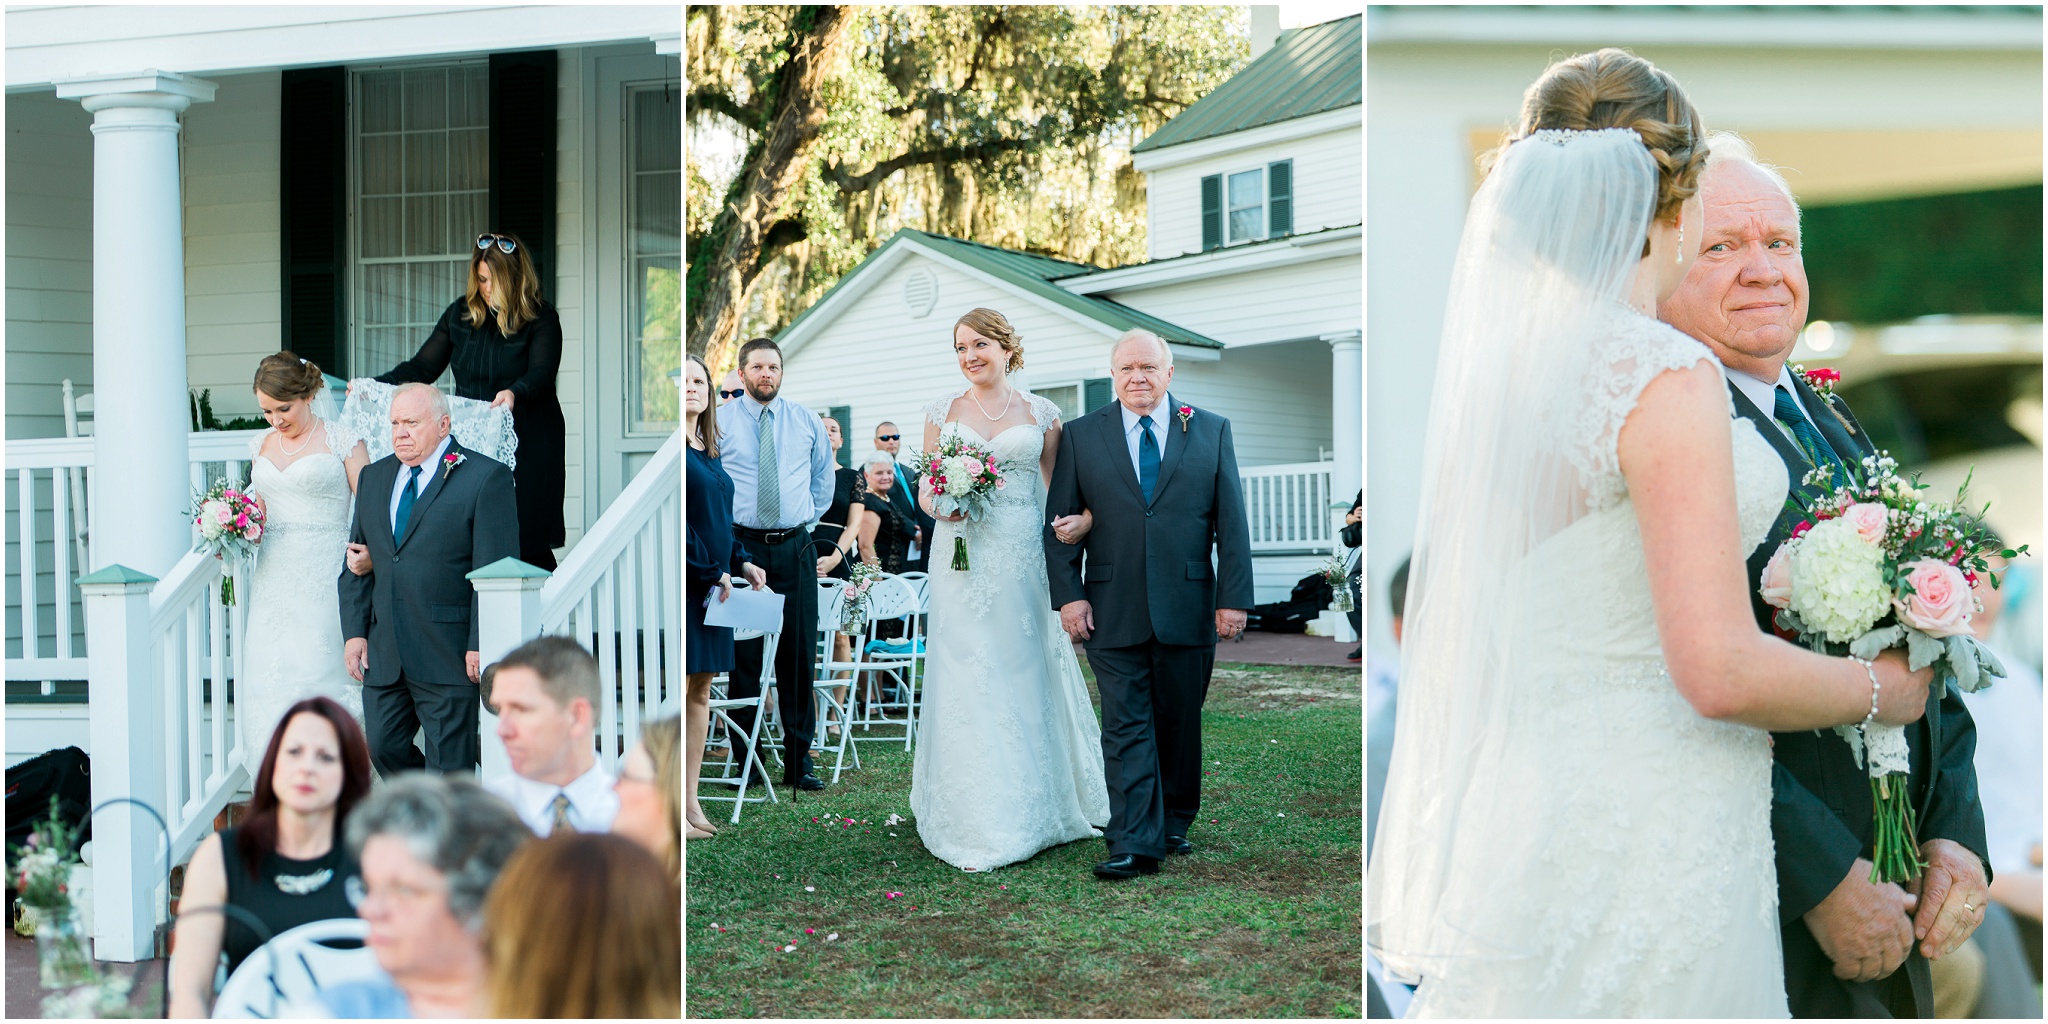 Paige's father walking her down the aisle to give her away, Upper Mill Plantation Wedding Session 15, Conway, South Carolina, Wedding coordinator, flowers and Cake - Willow Event Designs, Venue - Upper Mill Plantation, DJ - Carolina Entertainment, Dress - Foxy Lady, www.onelifephoto.net Photography